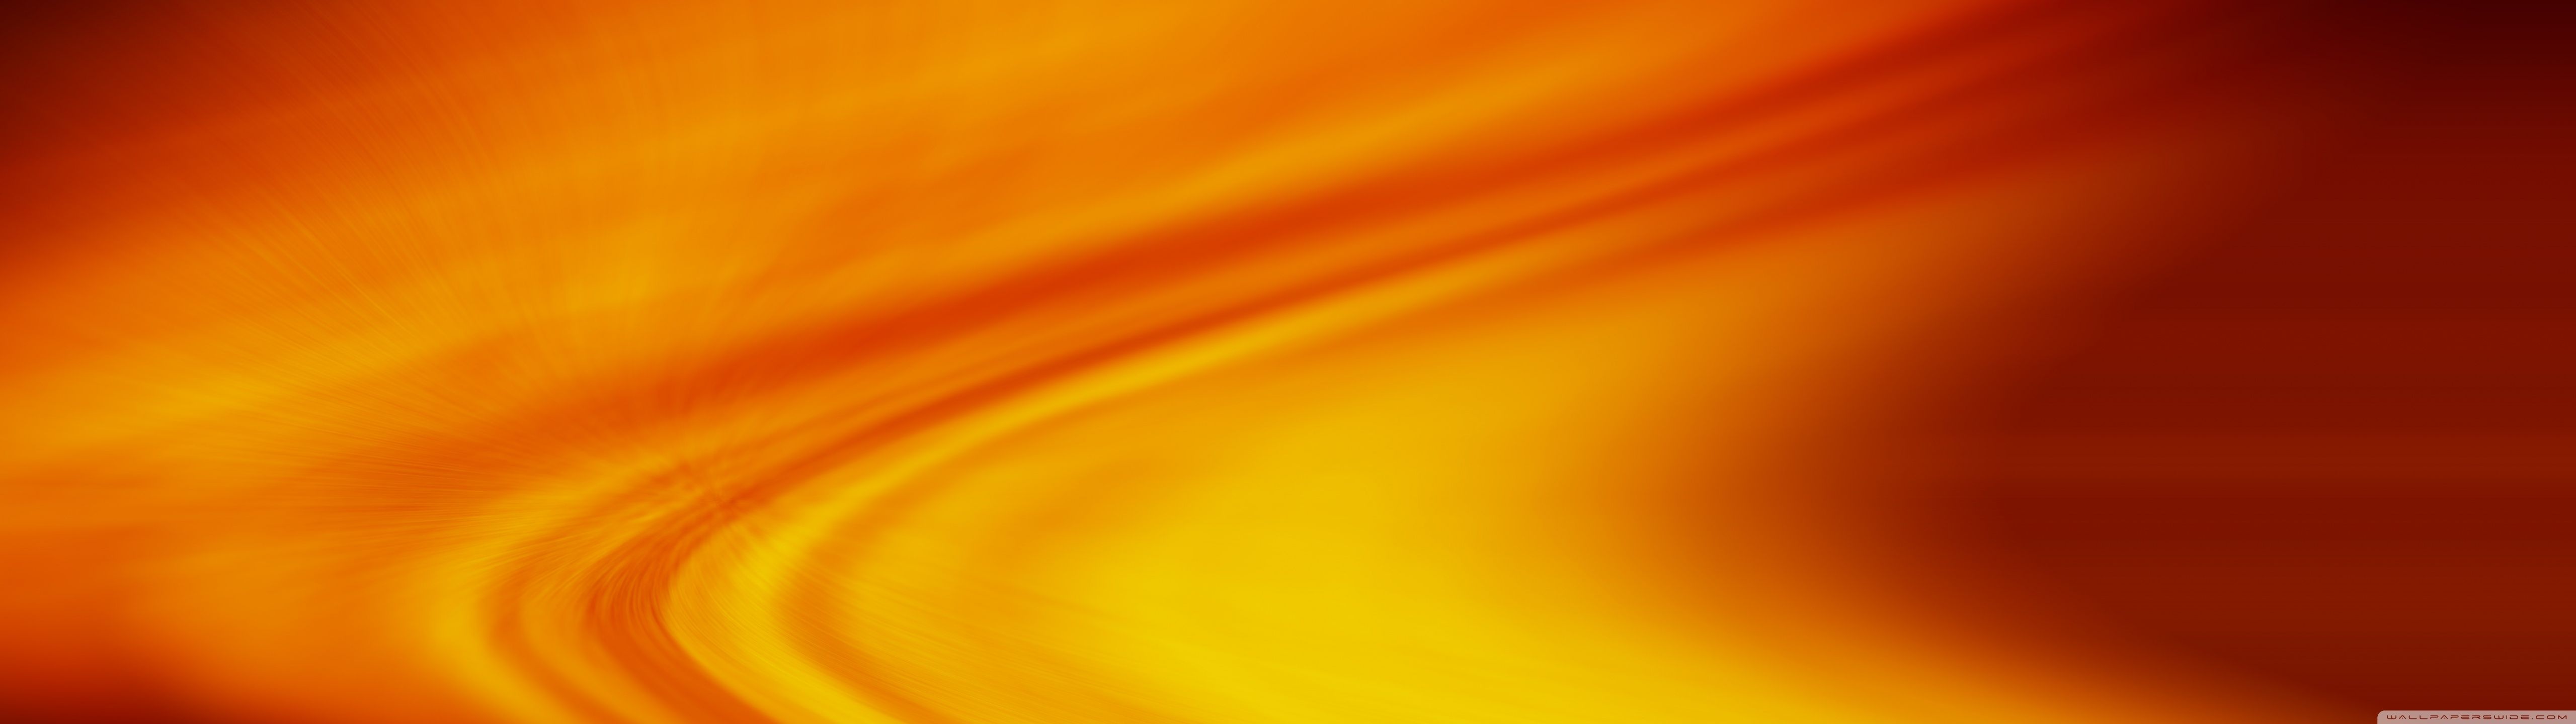 Fire flame wallpaper 2560x1600 for your PC, mobile phone, iPad, iPhone. - 5120x1440